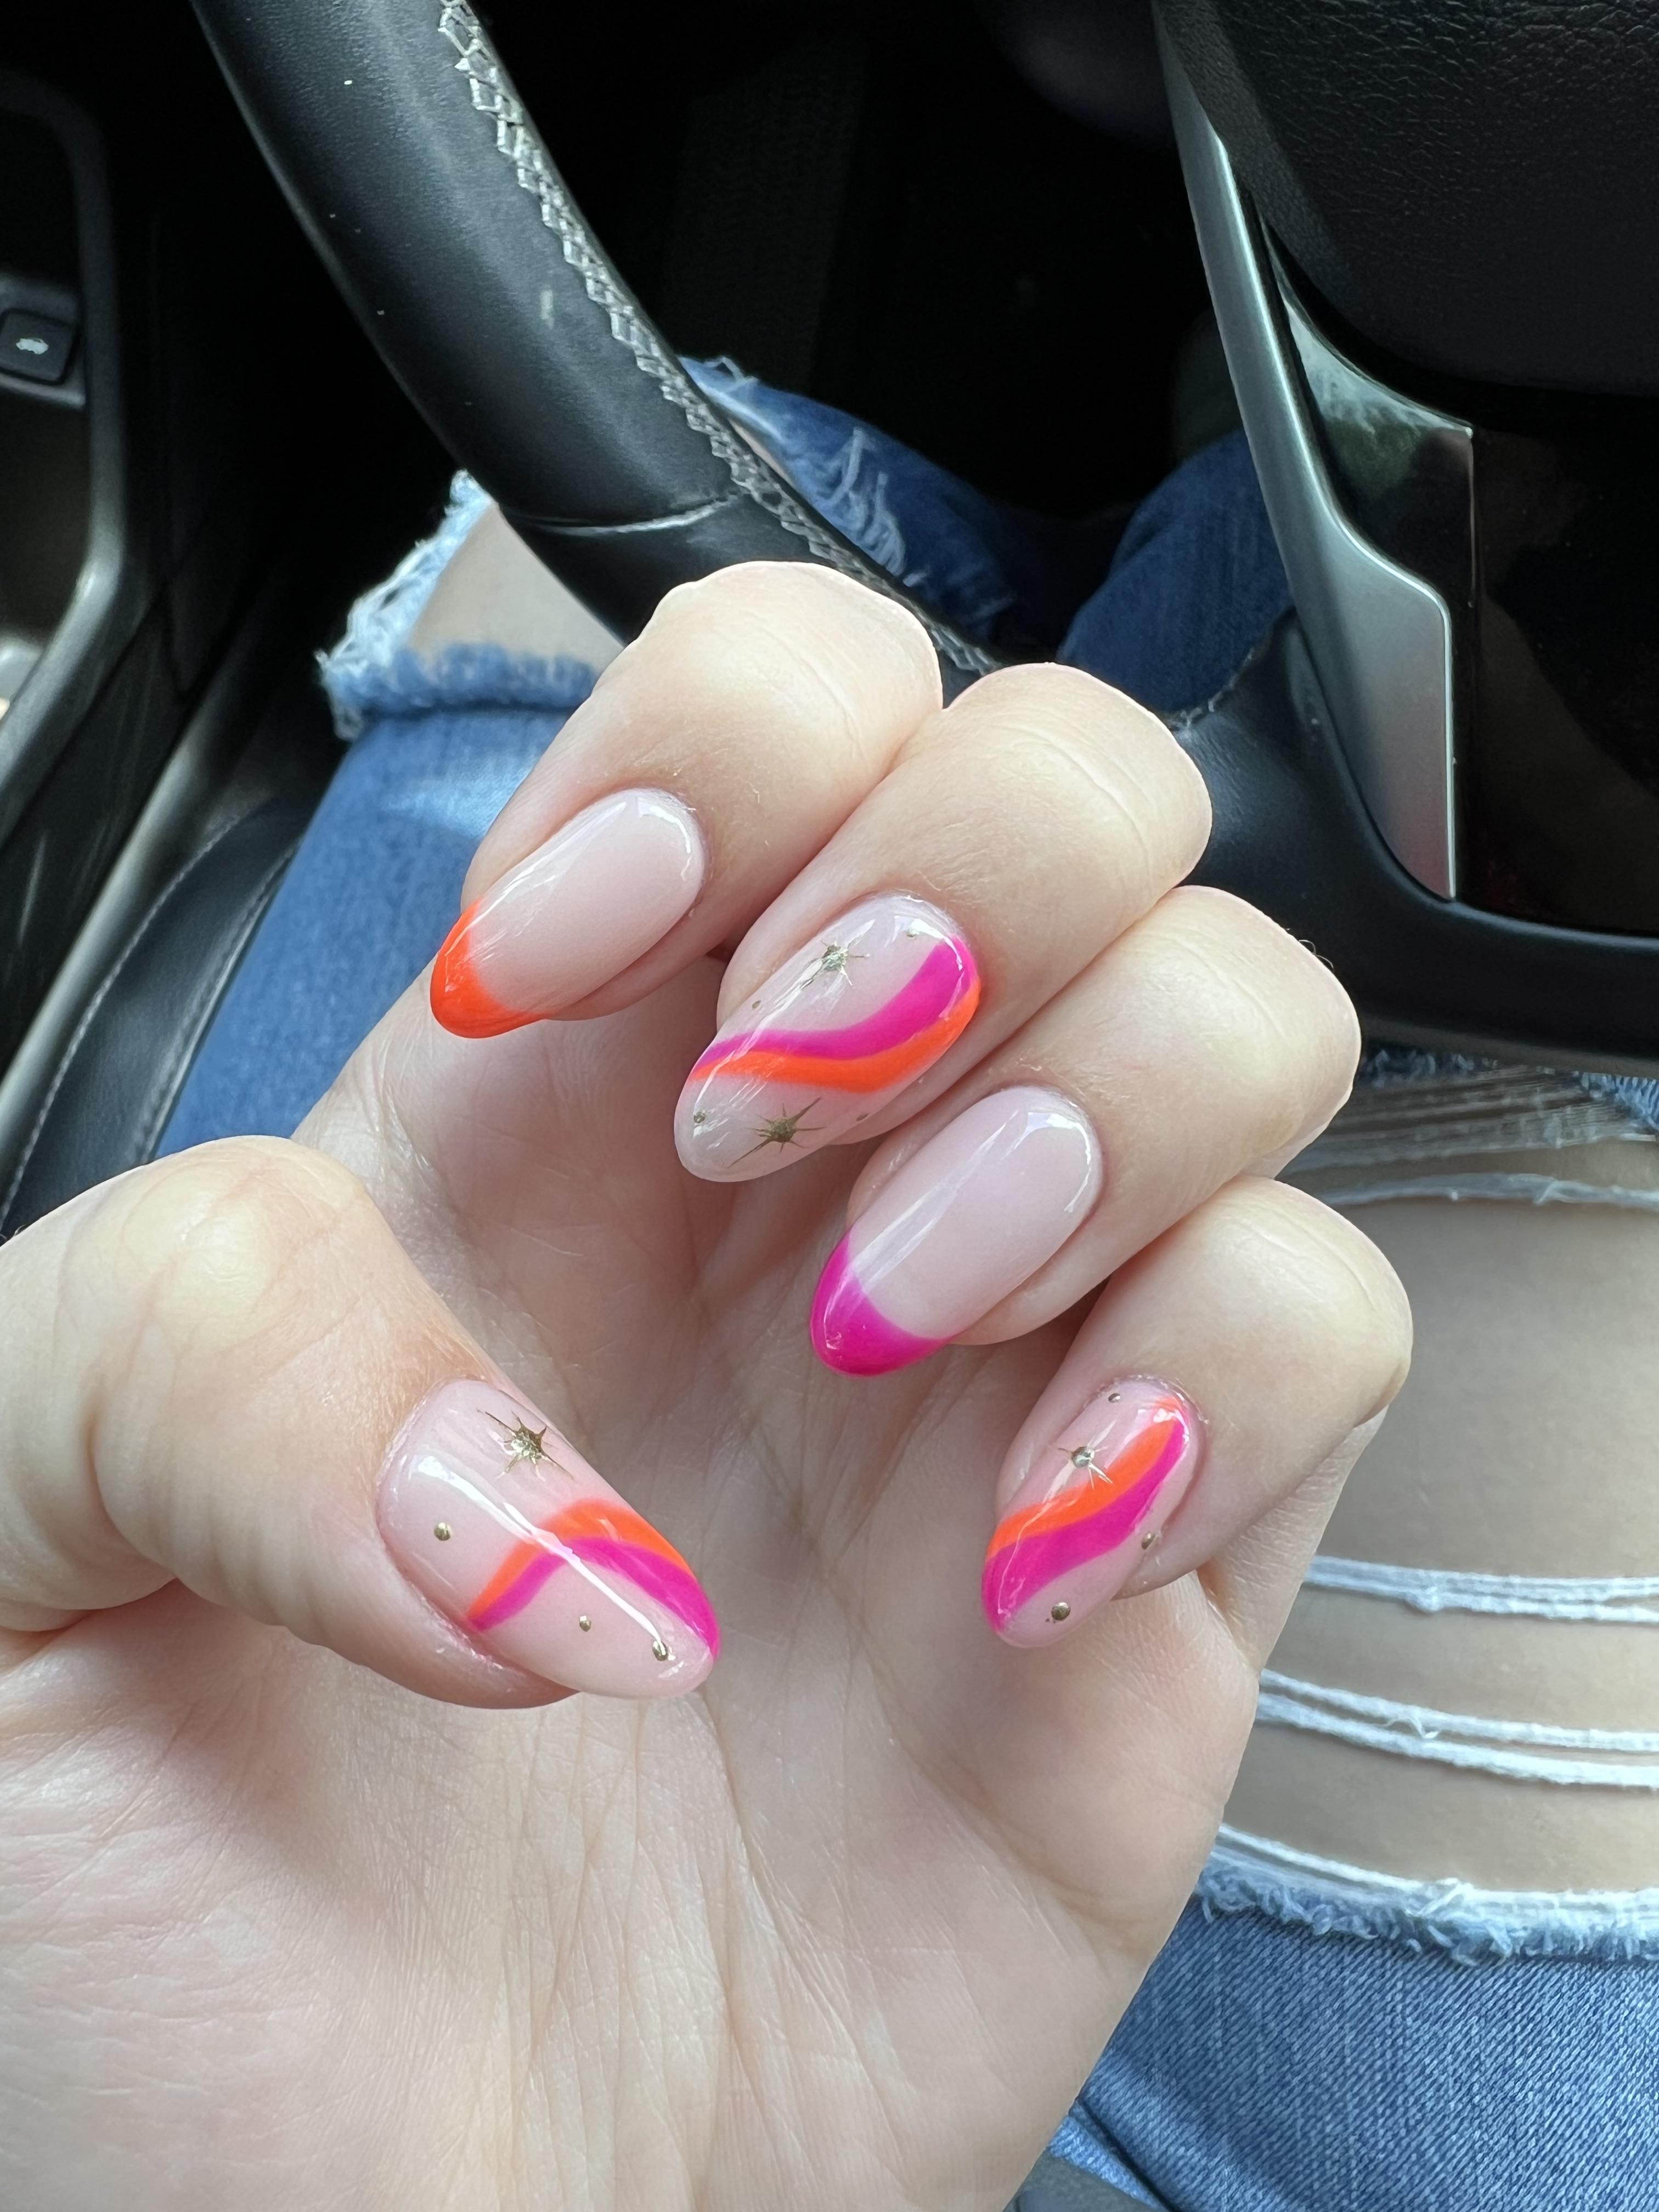 Nails Of American Heights | Nails Salon Houston, TX 77008